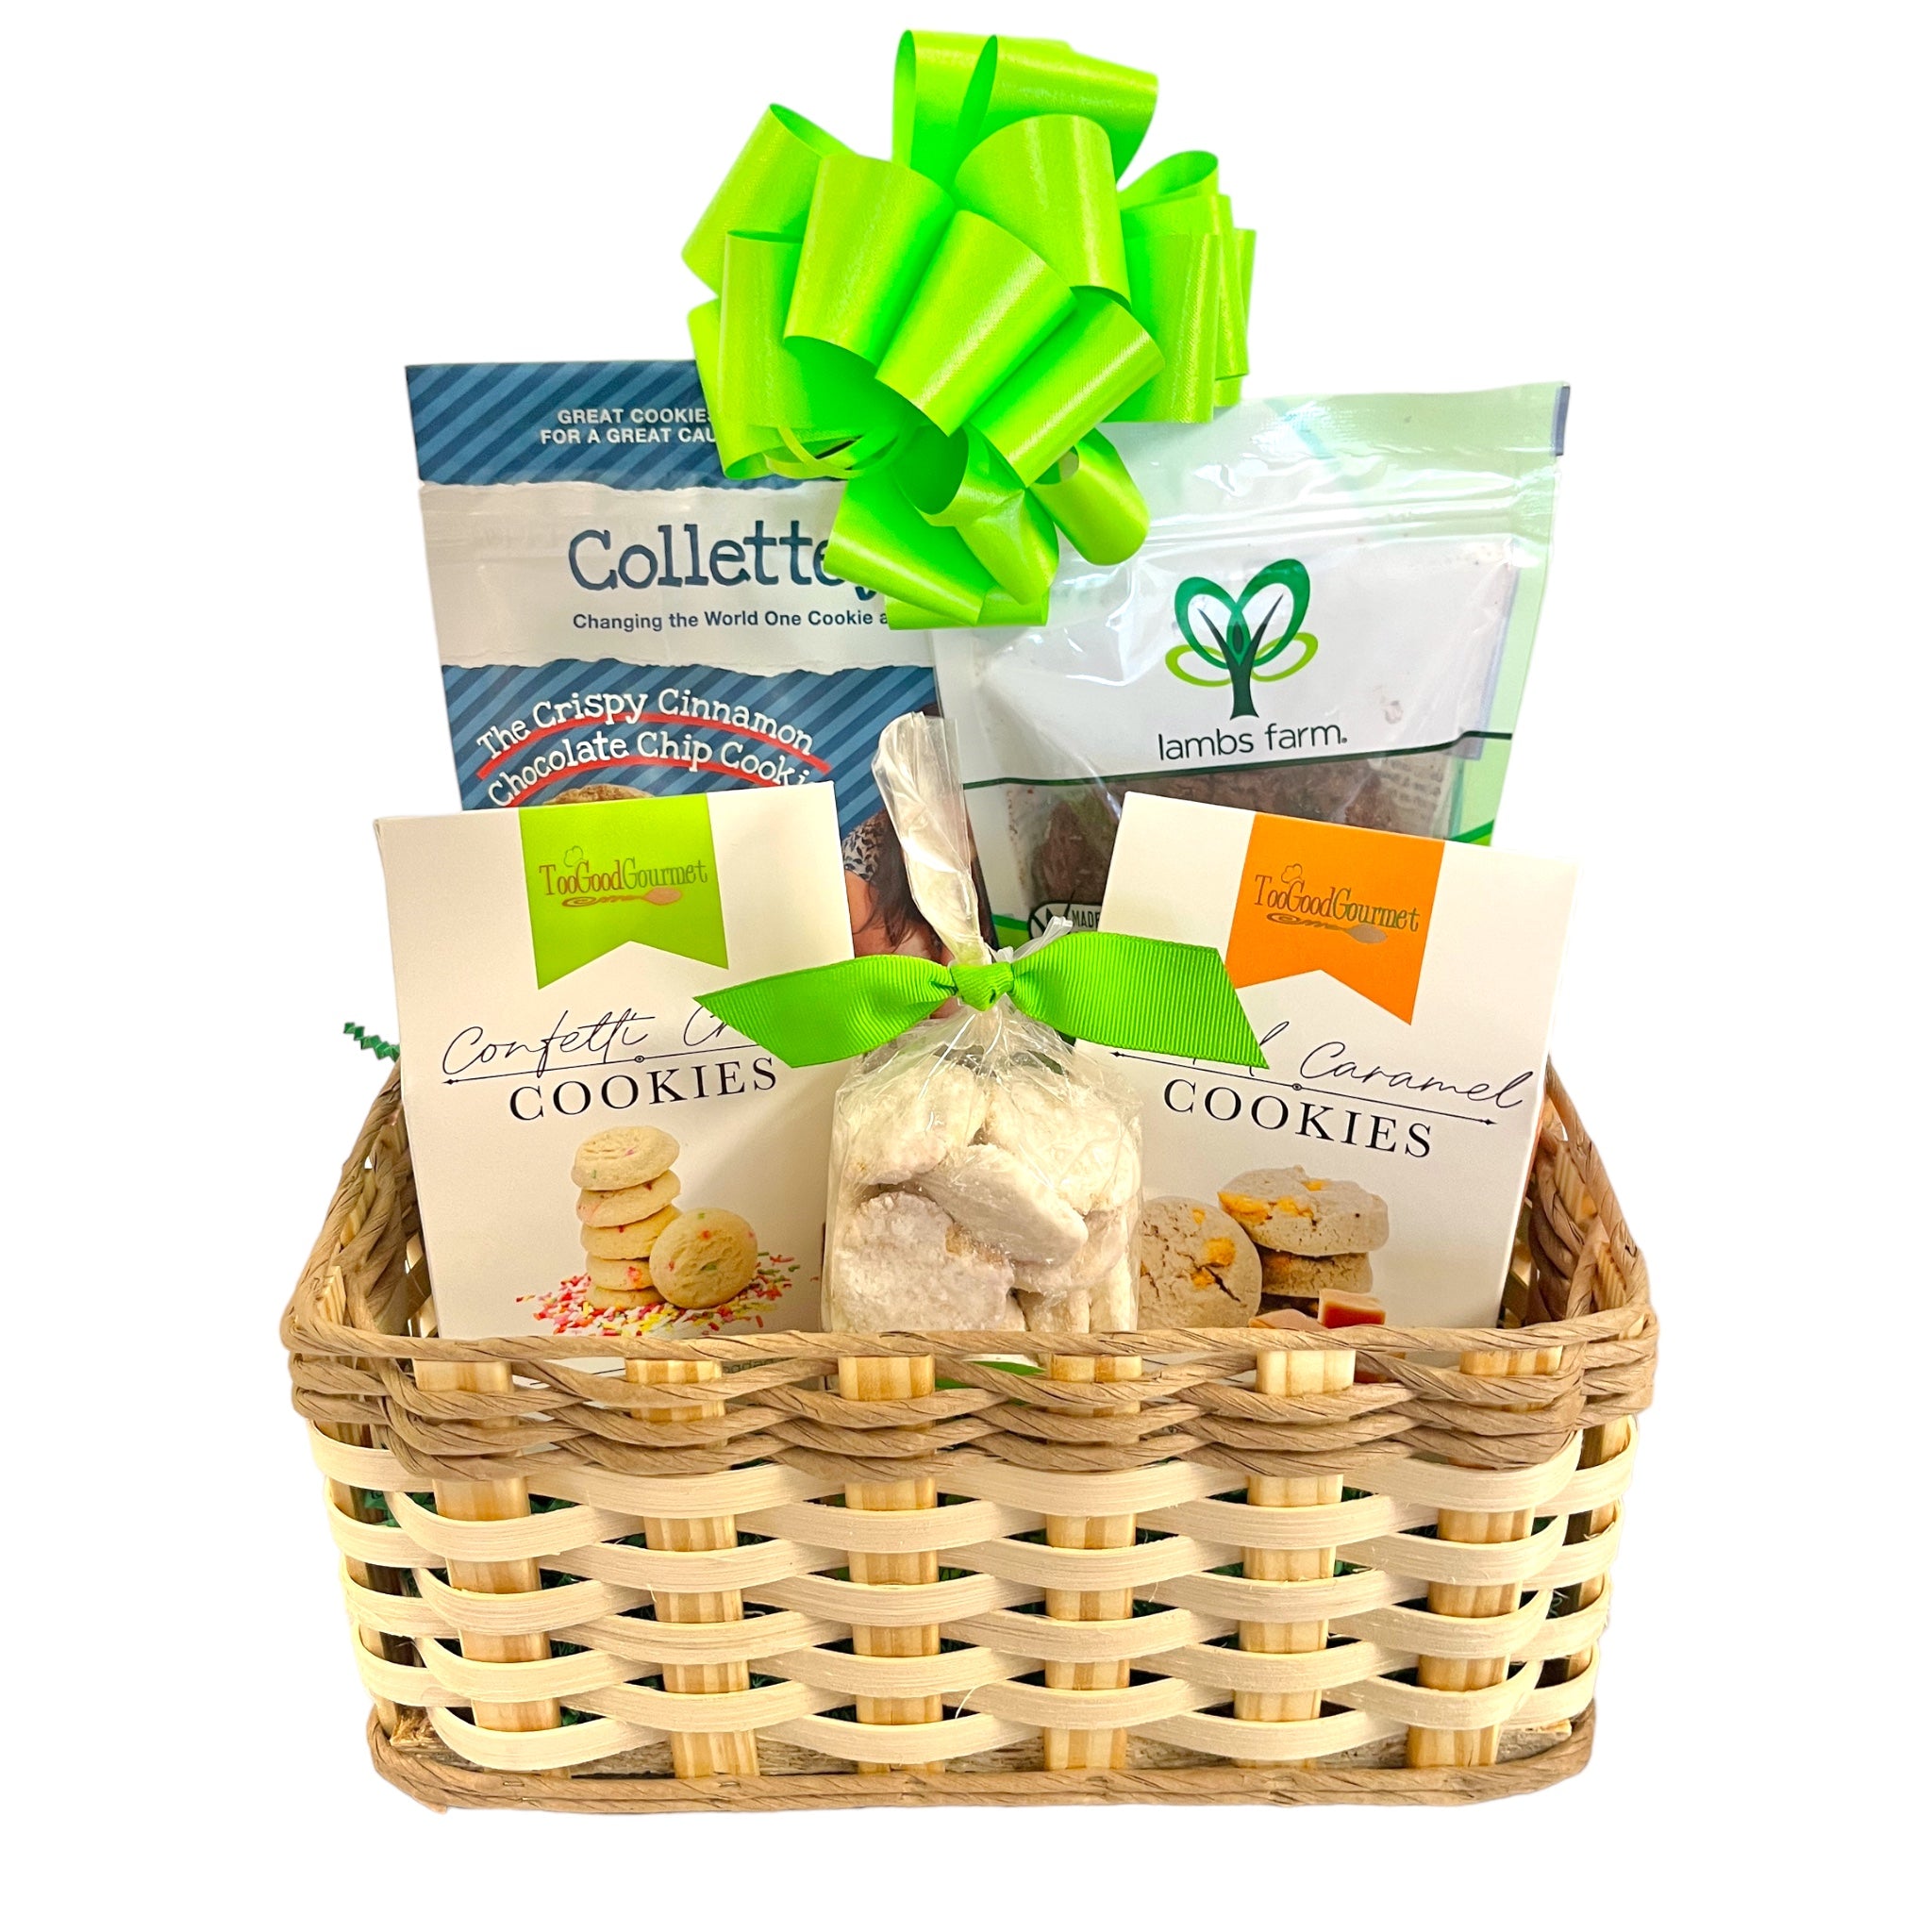 Wine Country Gift Baskets A Day Off Spa Gift Basket for Her Women Men  Lavender Vanilla Scented Spa Gift Baskets Bath & Body Gift Set Lovely Chic  Lined Basket Slippers and More! :